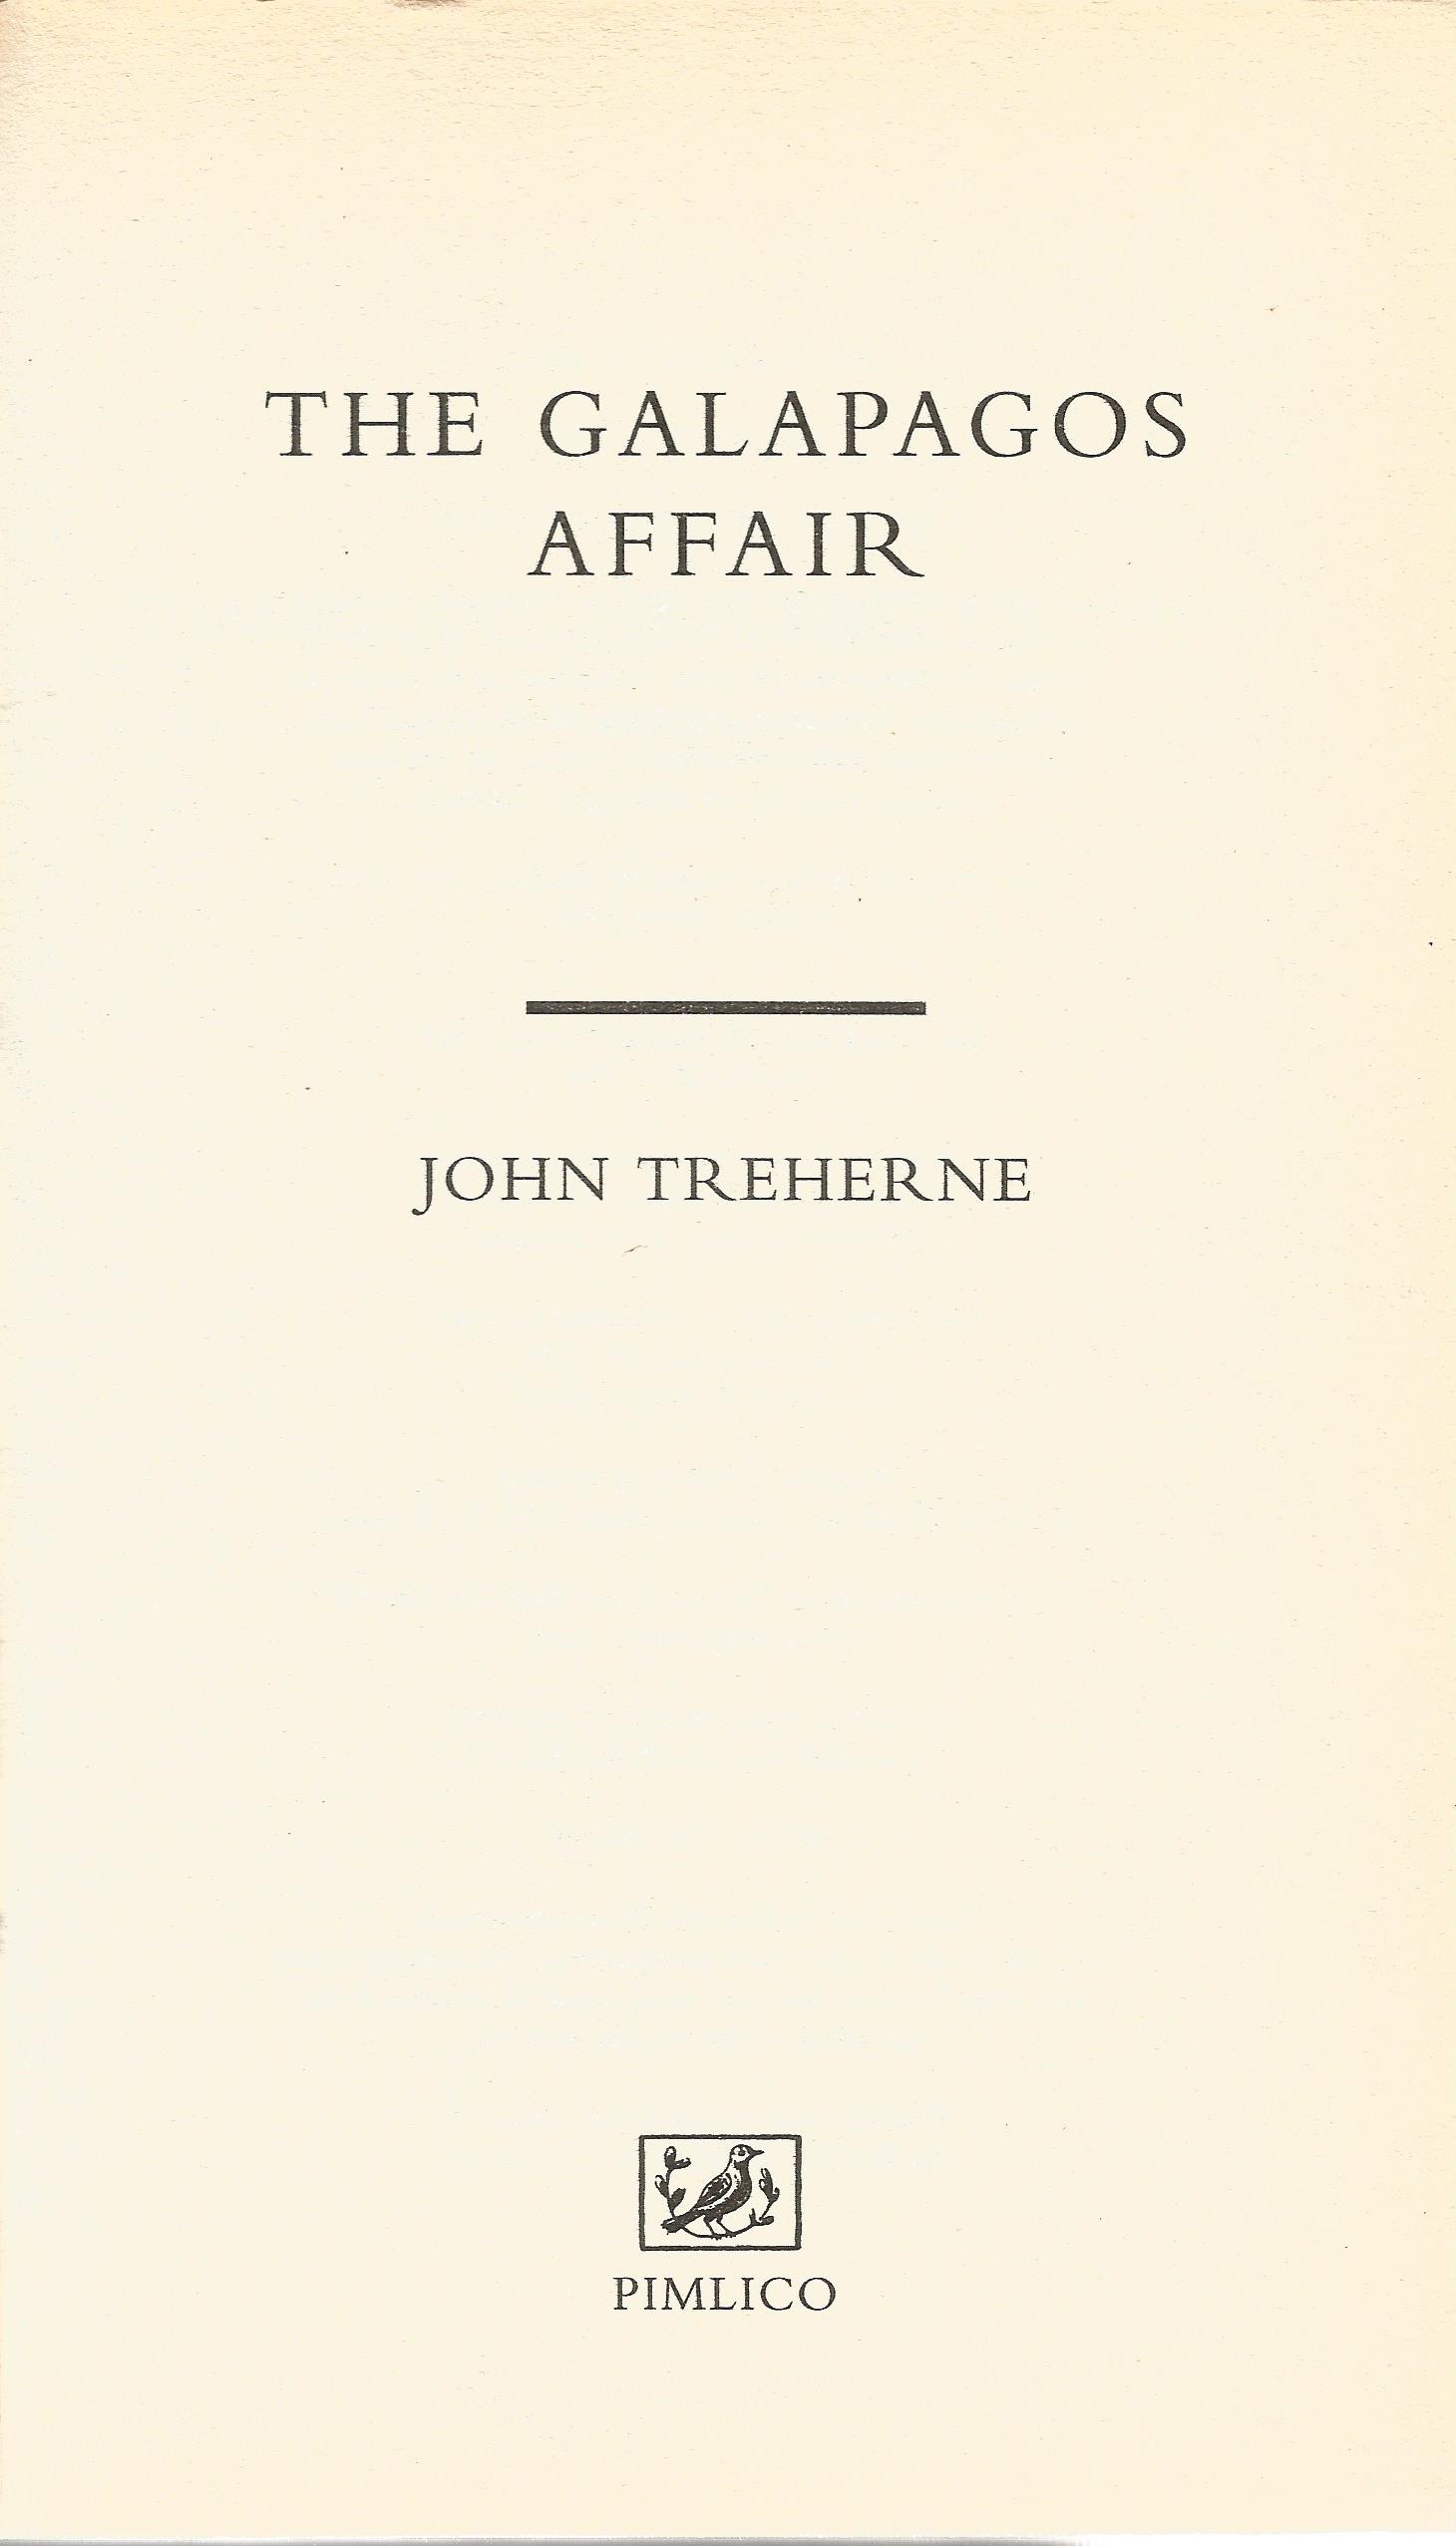 The Galapagos Affair by John Treherne 2002 Softback Book published by Pimlico good condition. - Image 2 of 3